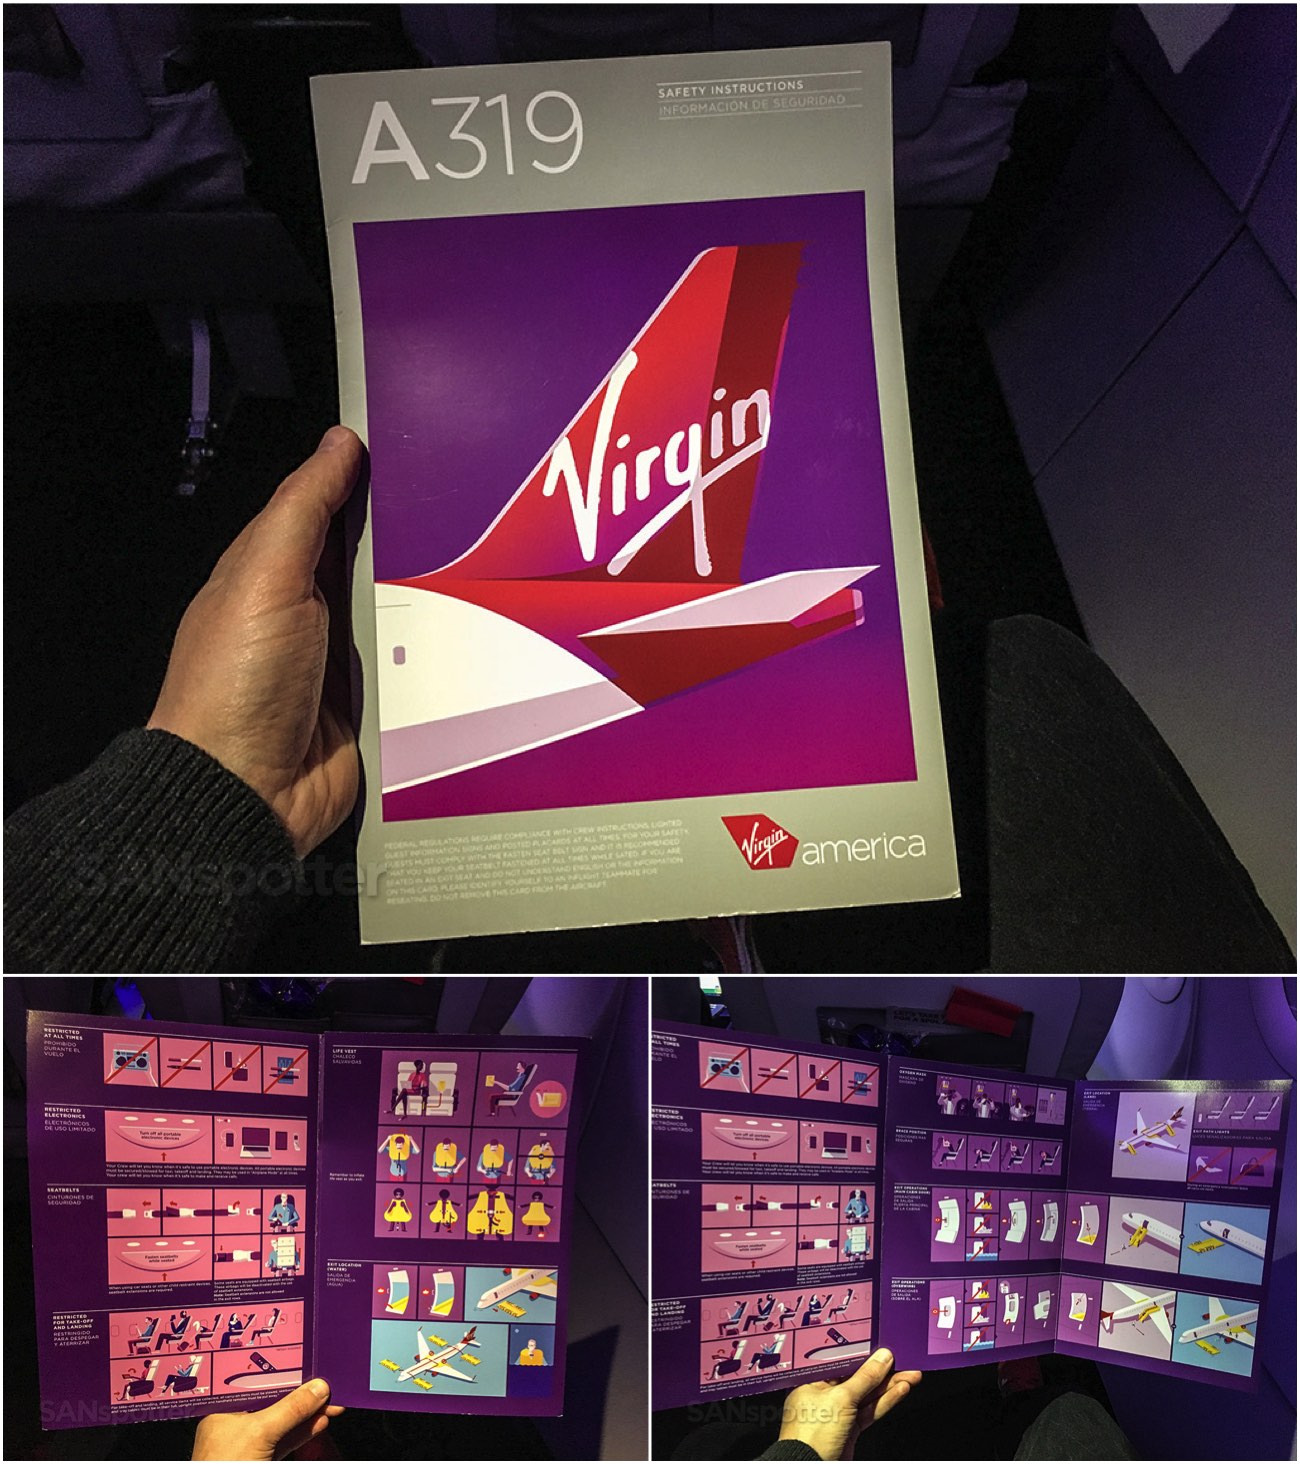 QVirgin America a319 safety card